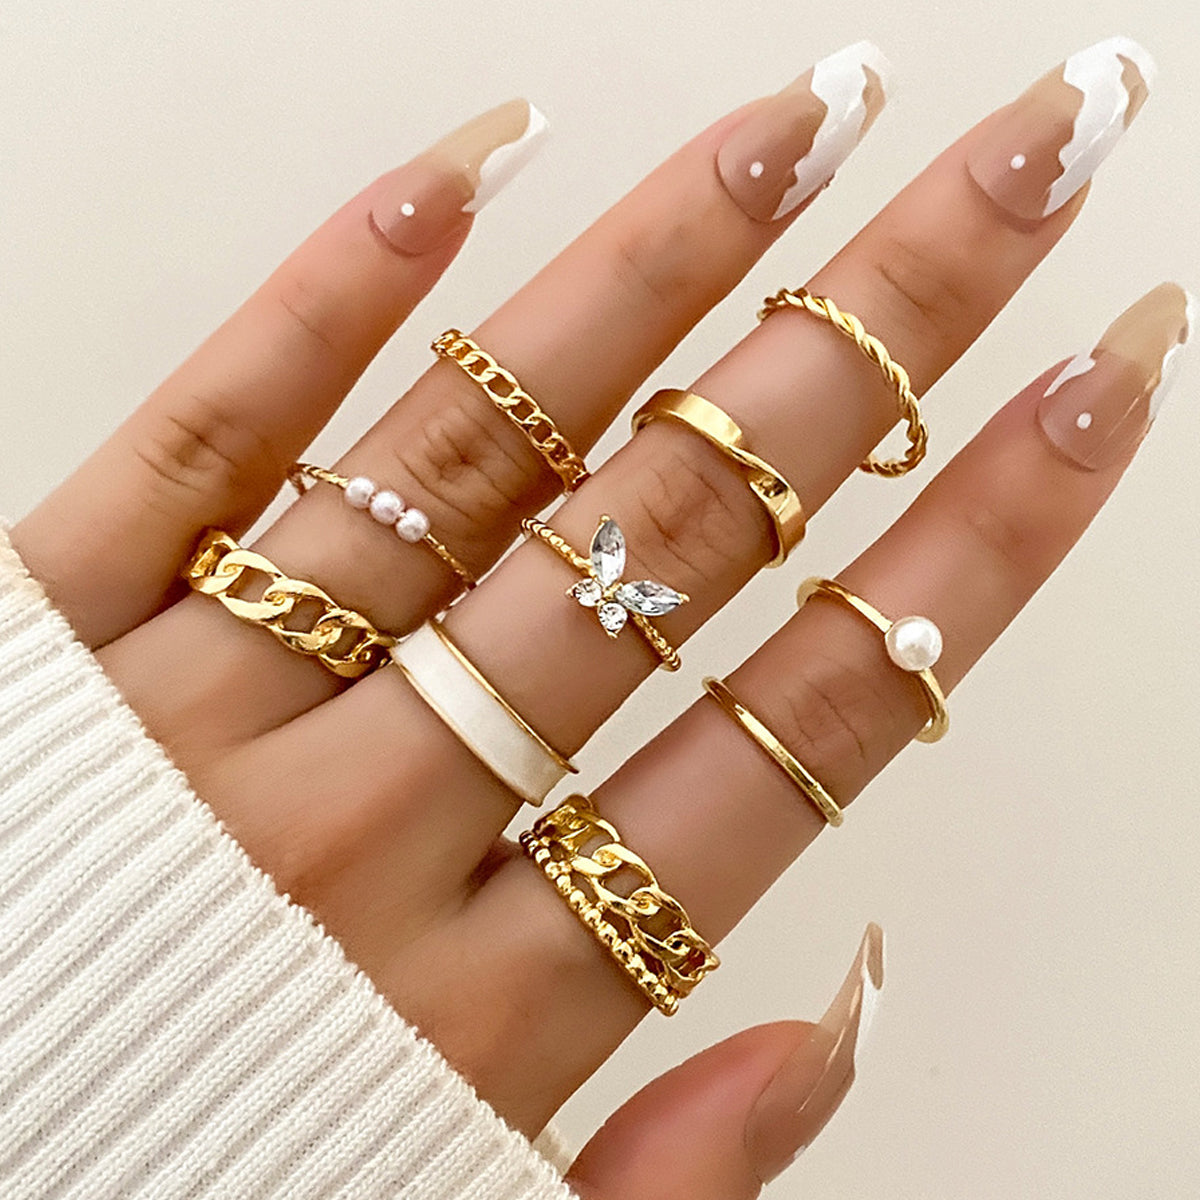 Vintage Inlaid Pearl Chain Ring 10pcs